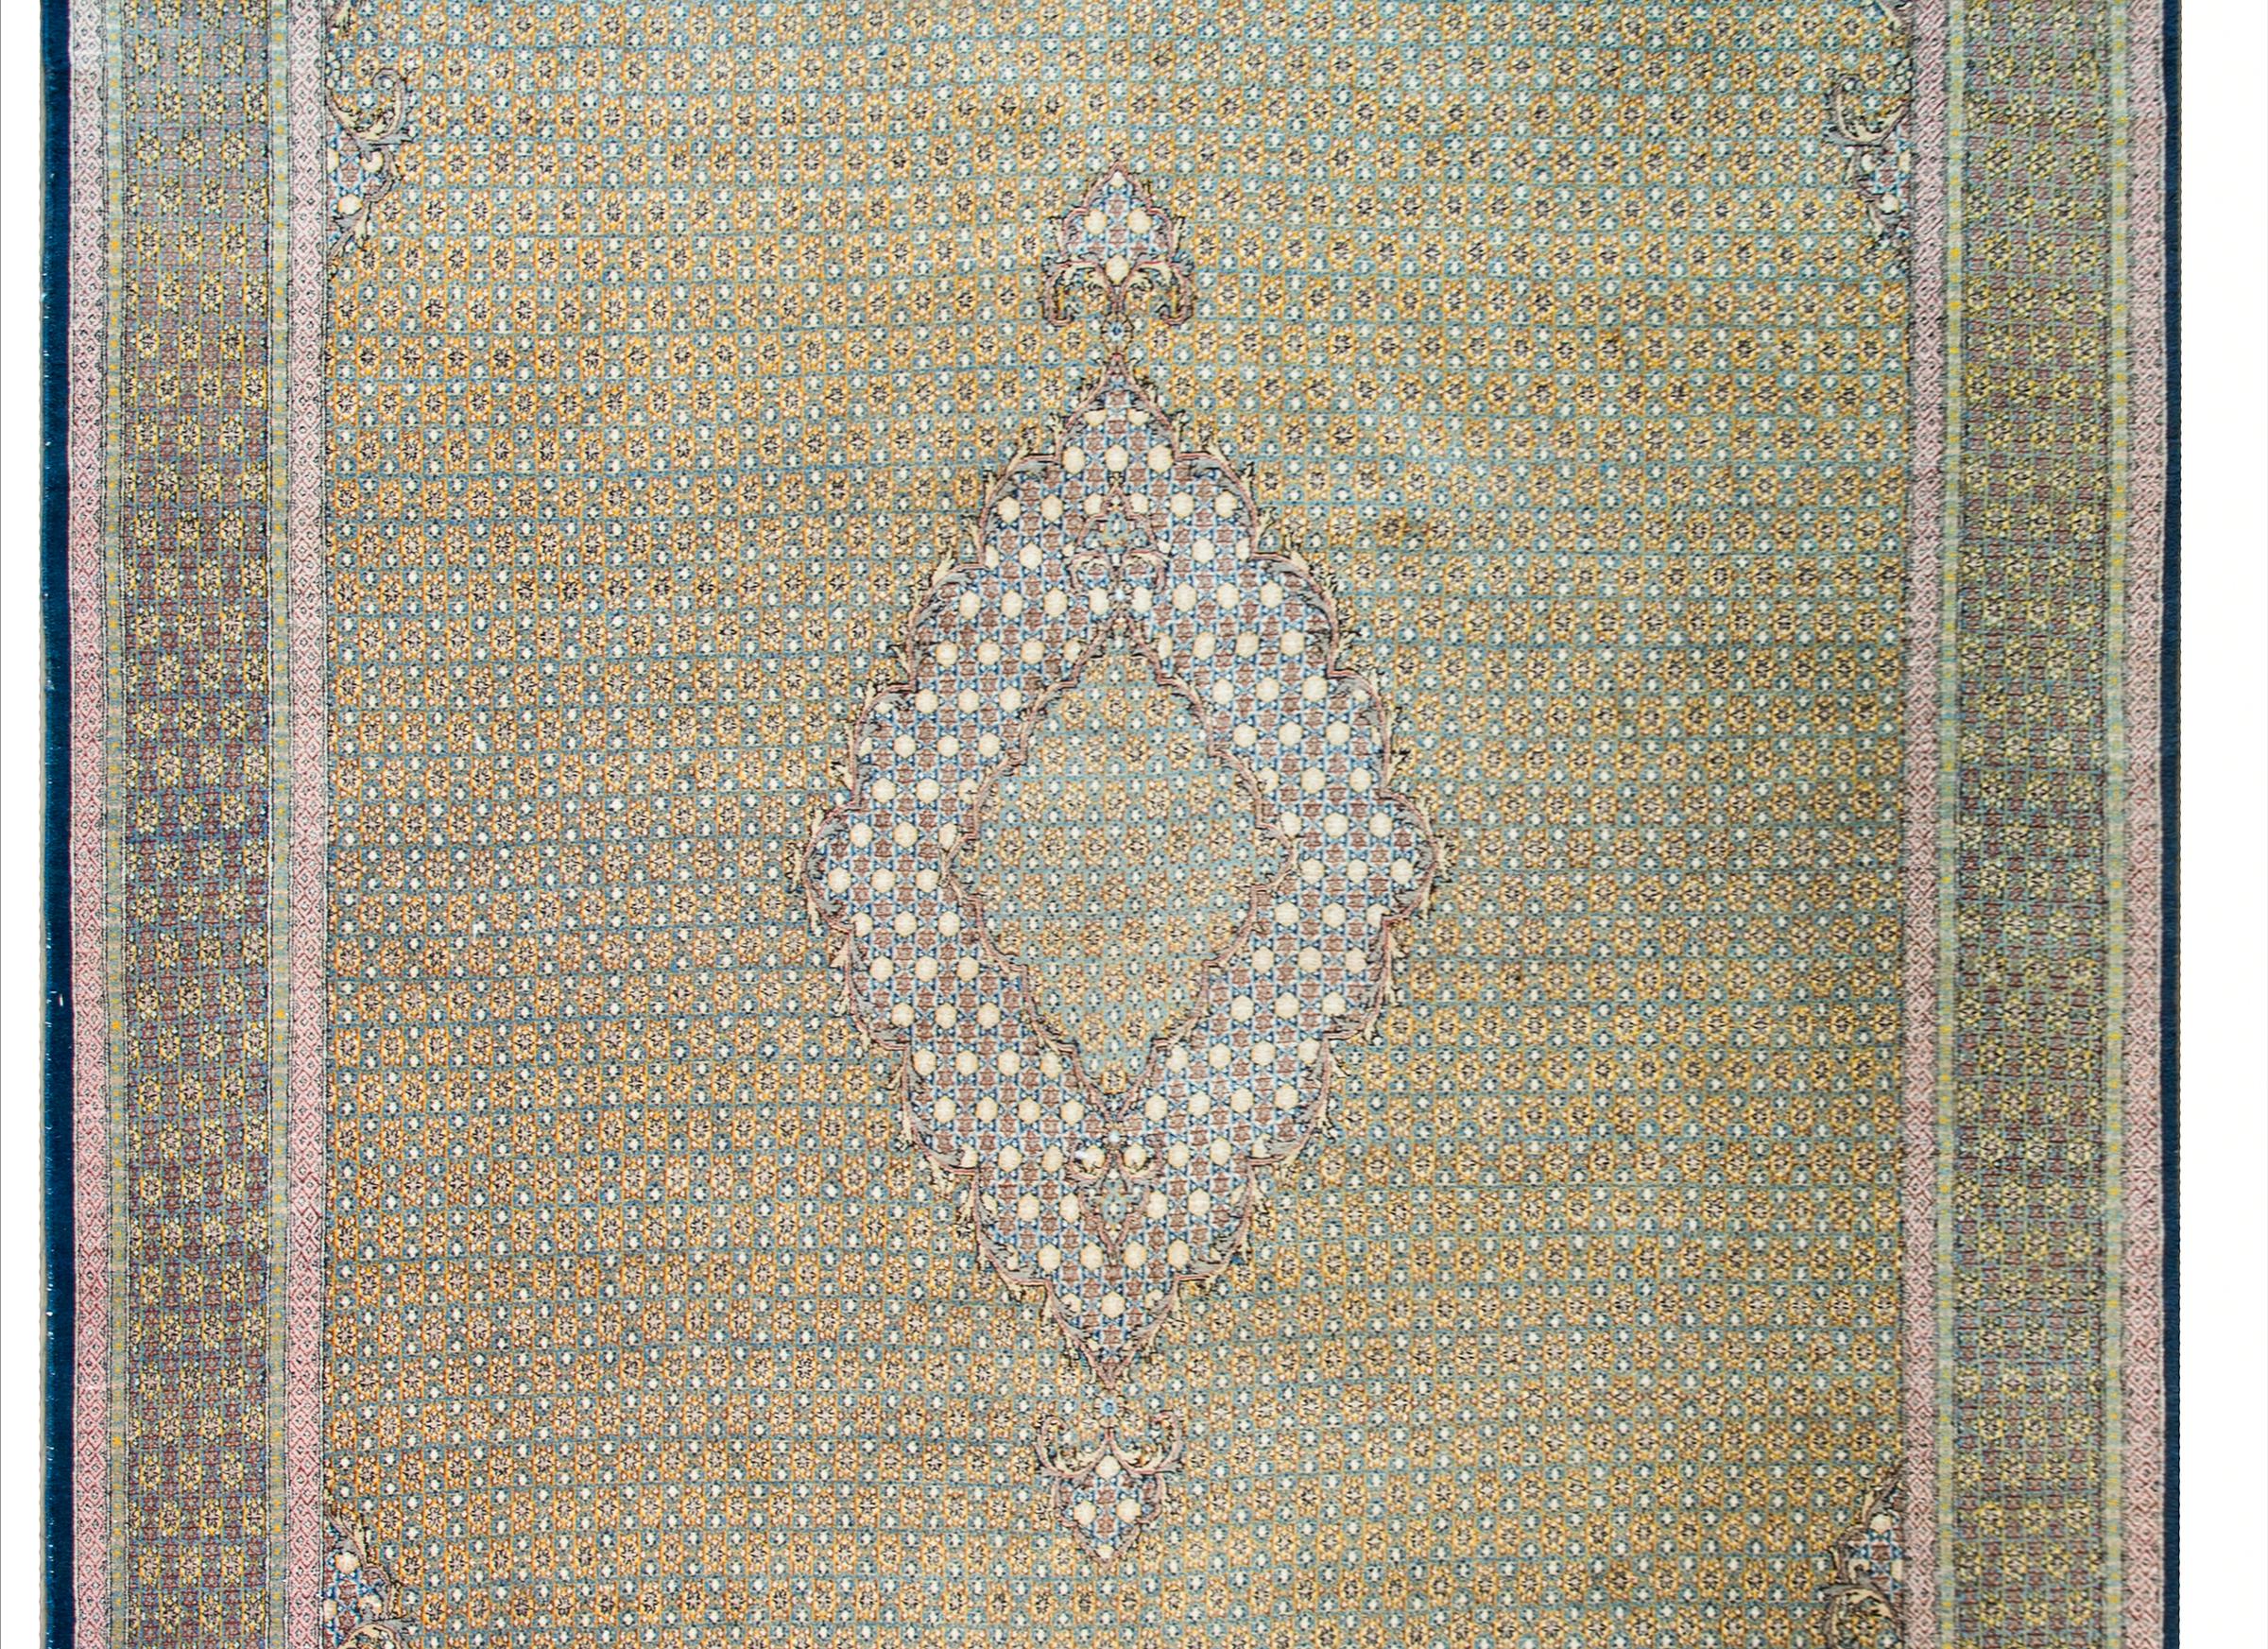 A mesmerizing mid-20th century Persian Qum rug with the most elaborately woven pattern containing myriad tiny stars in a reputed pattern across the field, and arranged with alternating colors to create a medallion in the center, and woven in